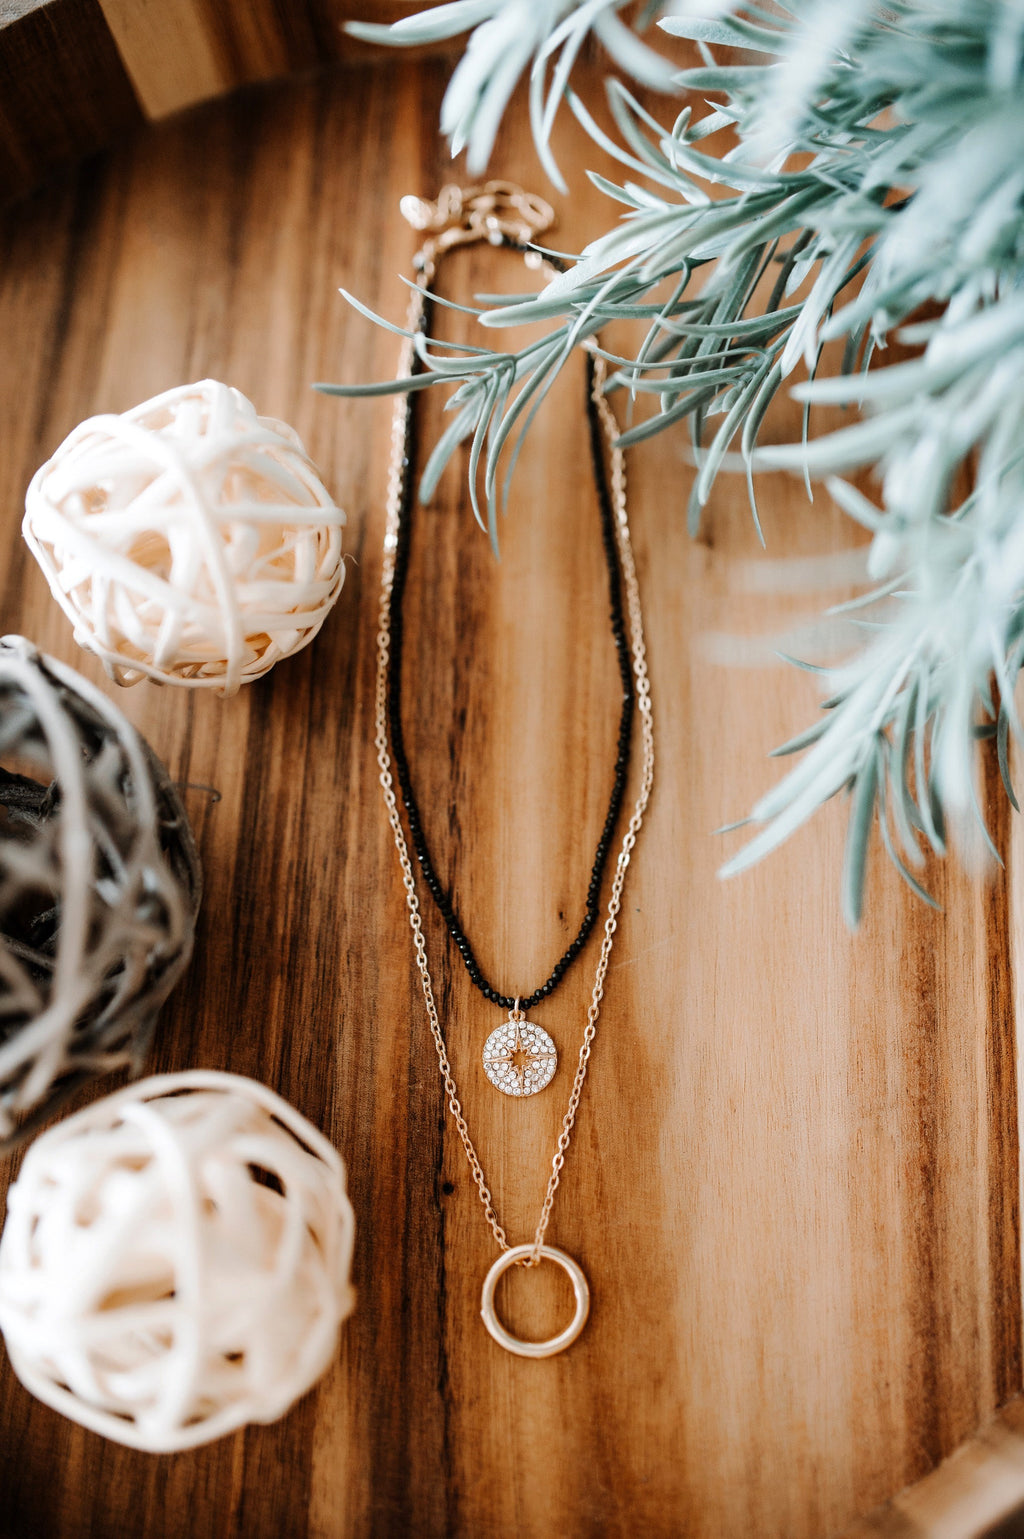 Layered Necklace With Sunburst & Ring Pendant In Gold & Black